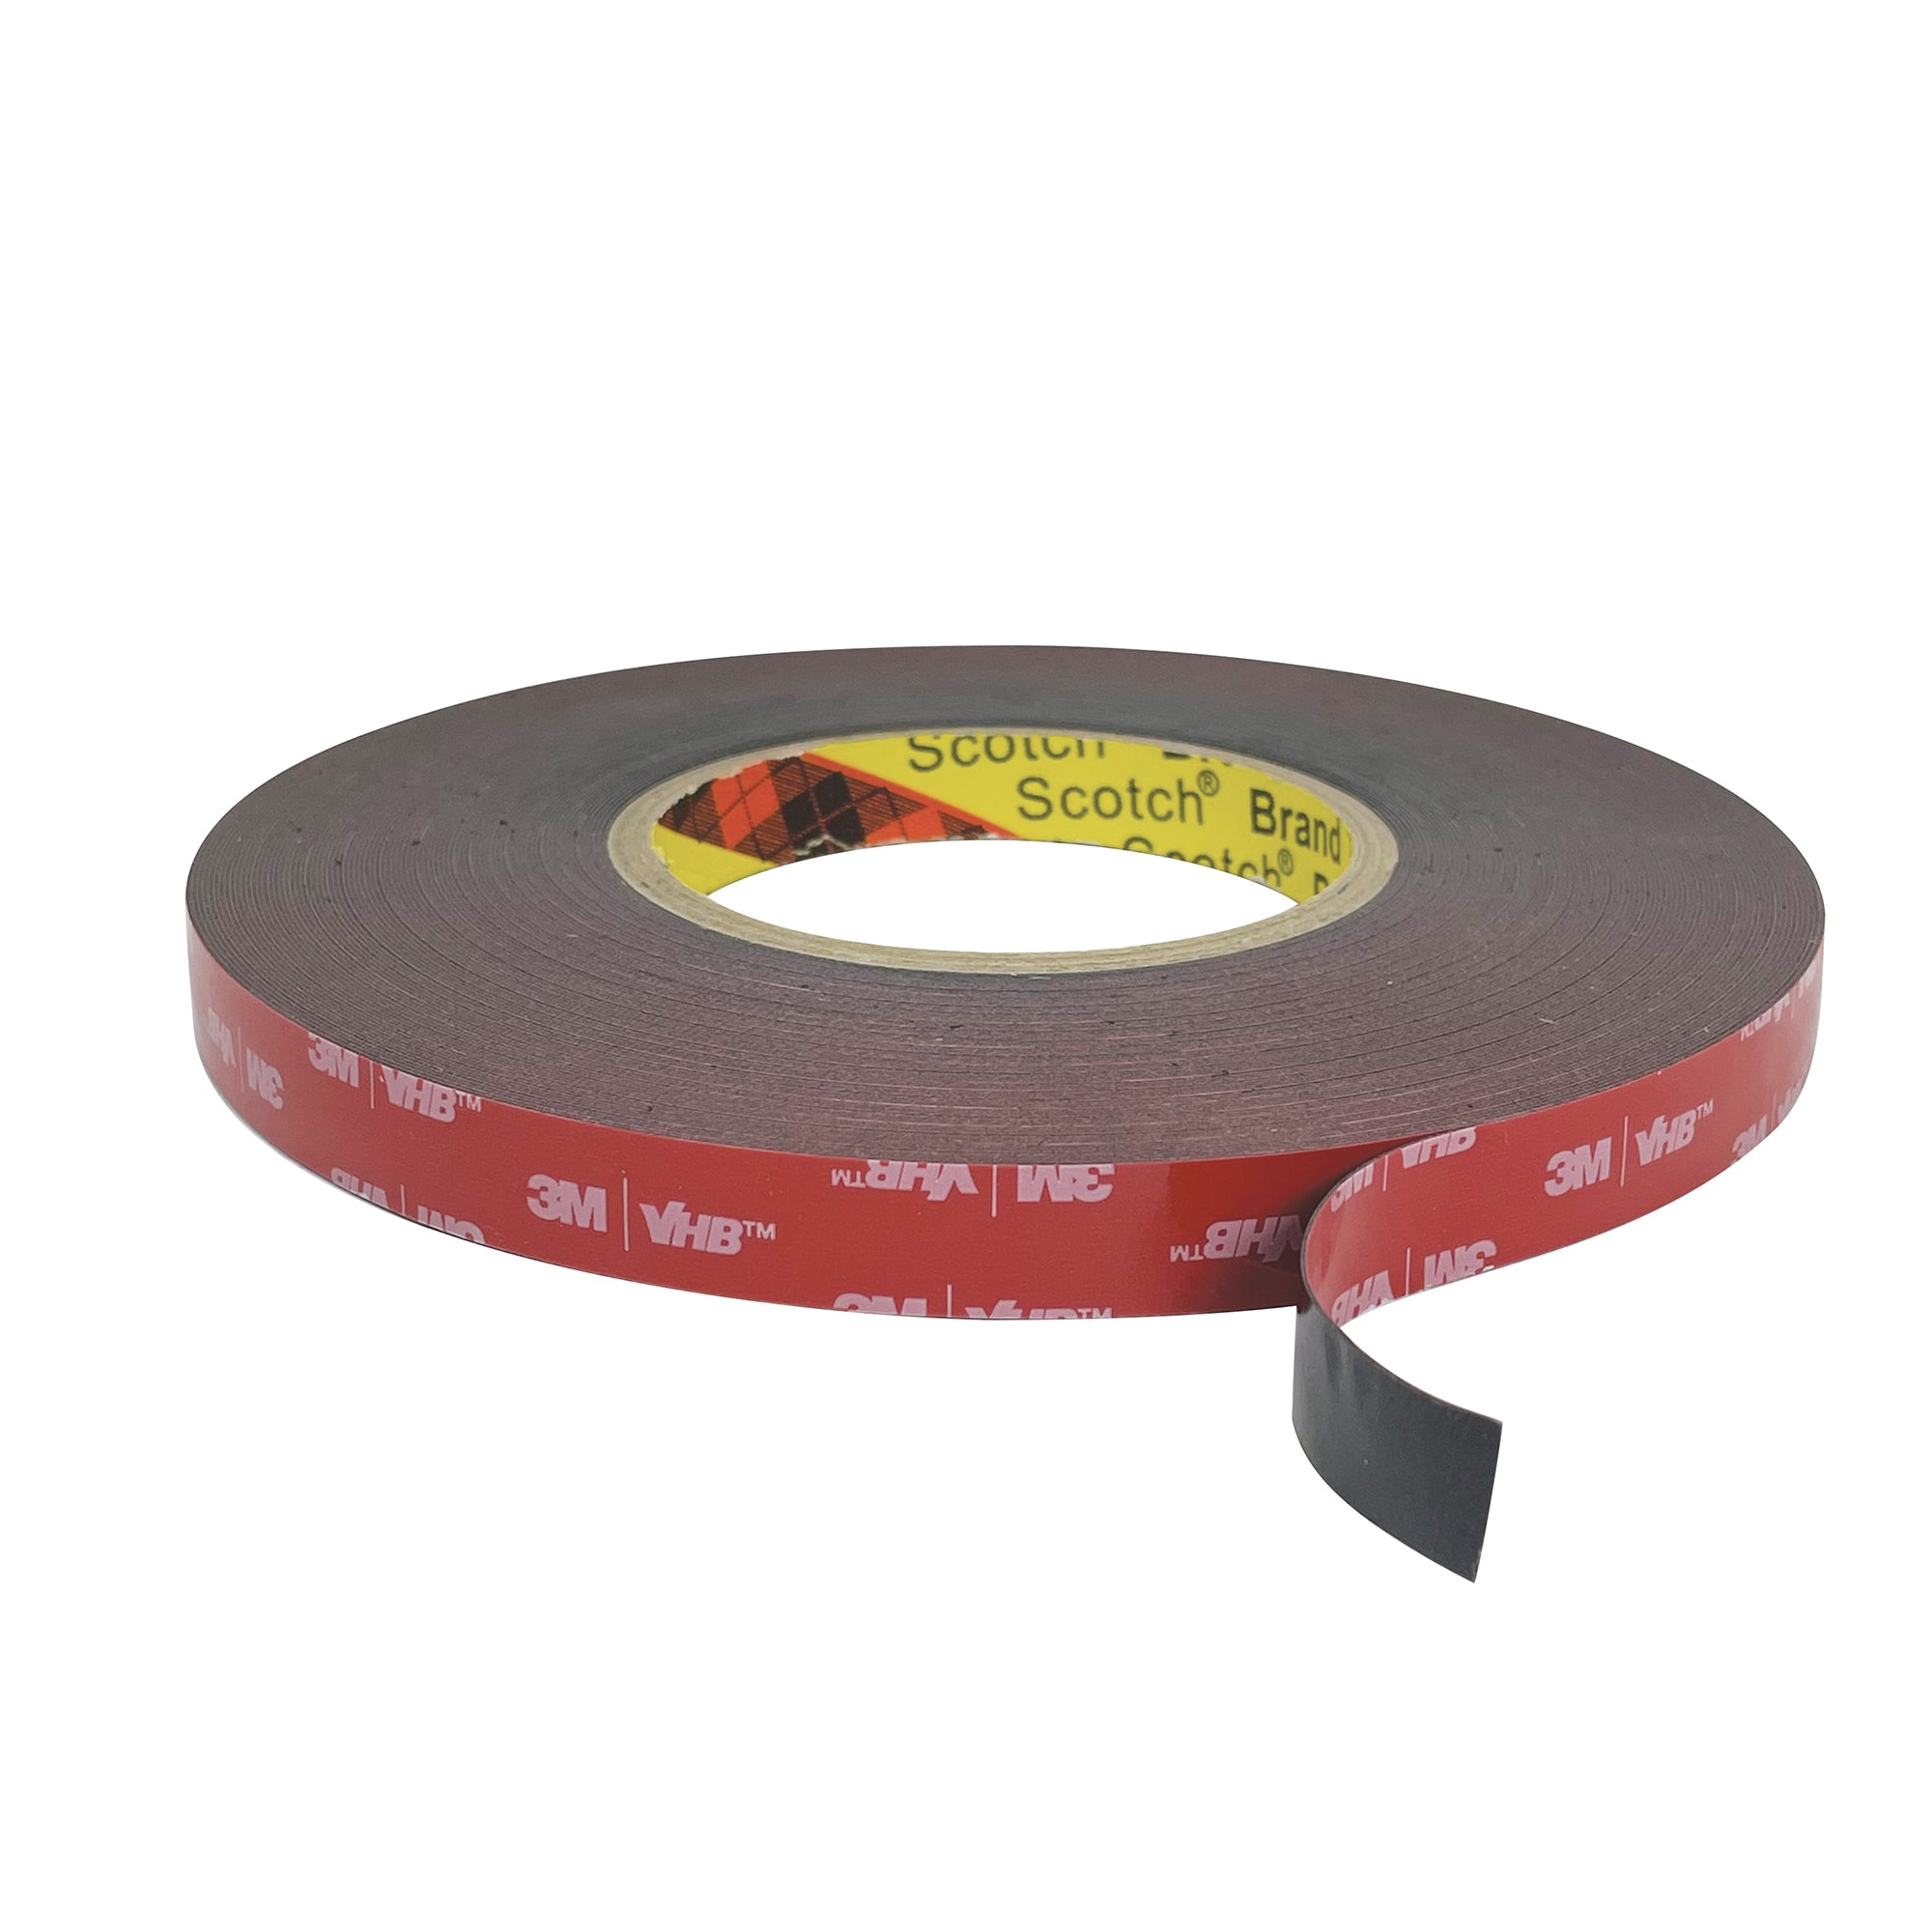 Nora Lighting NUTP13-ADHTAPE - Accent / Undercabinet - NUTP13 3M Adhesive Tape for Channel Mounting (Per Foot)